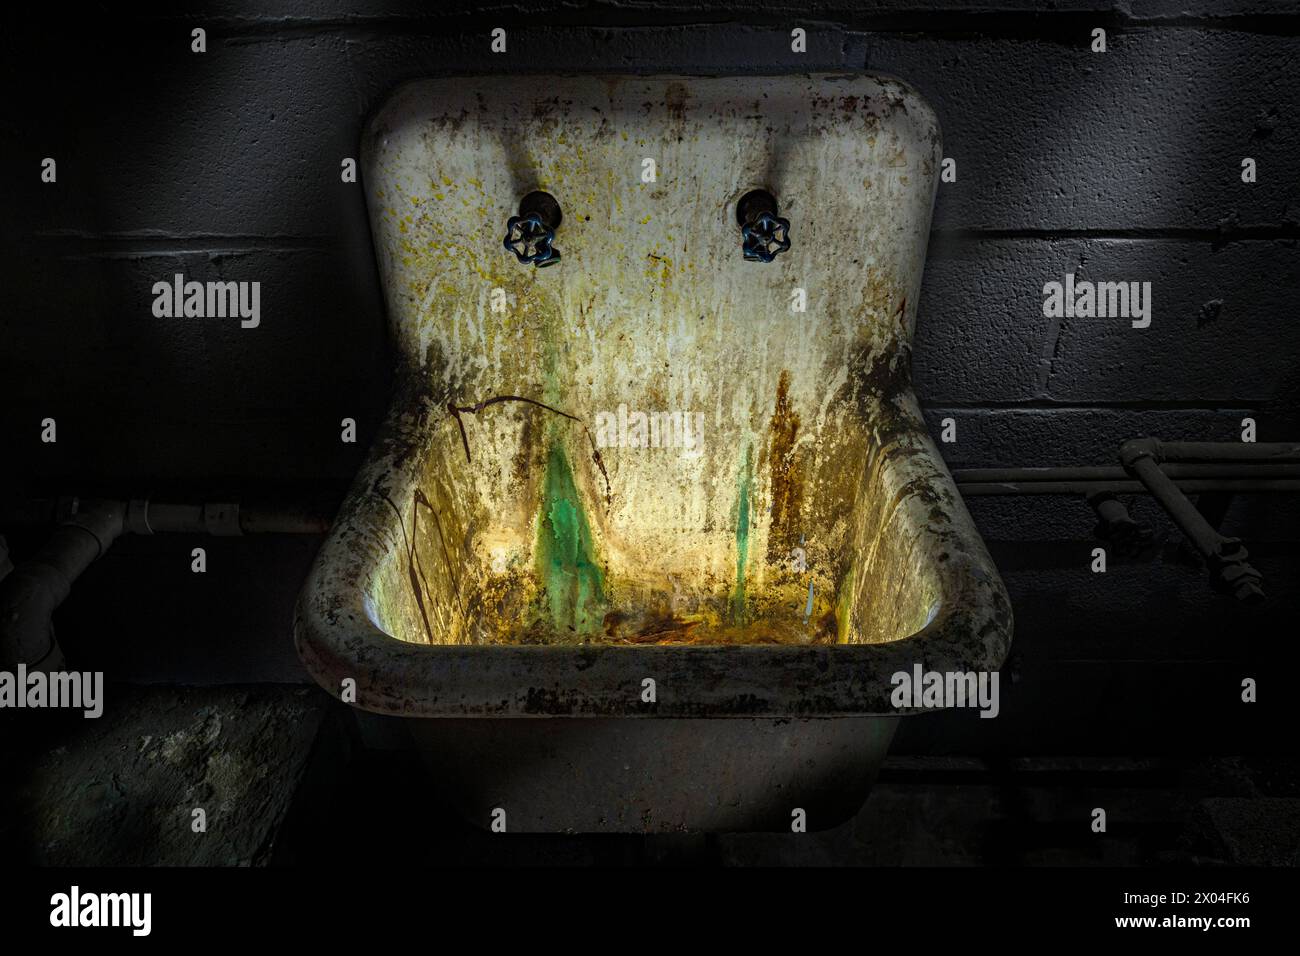 Dirty filthy stained sink Stock Photo